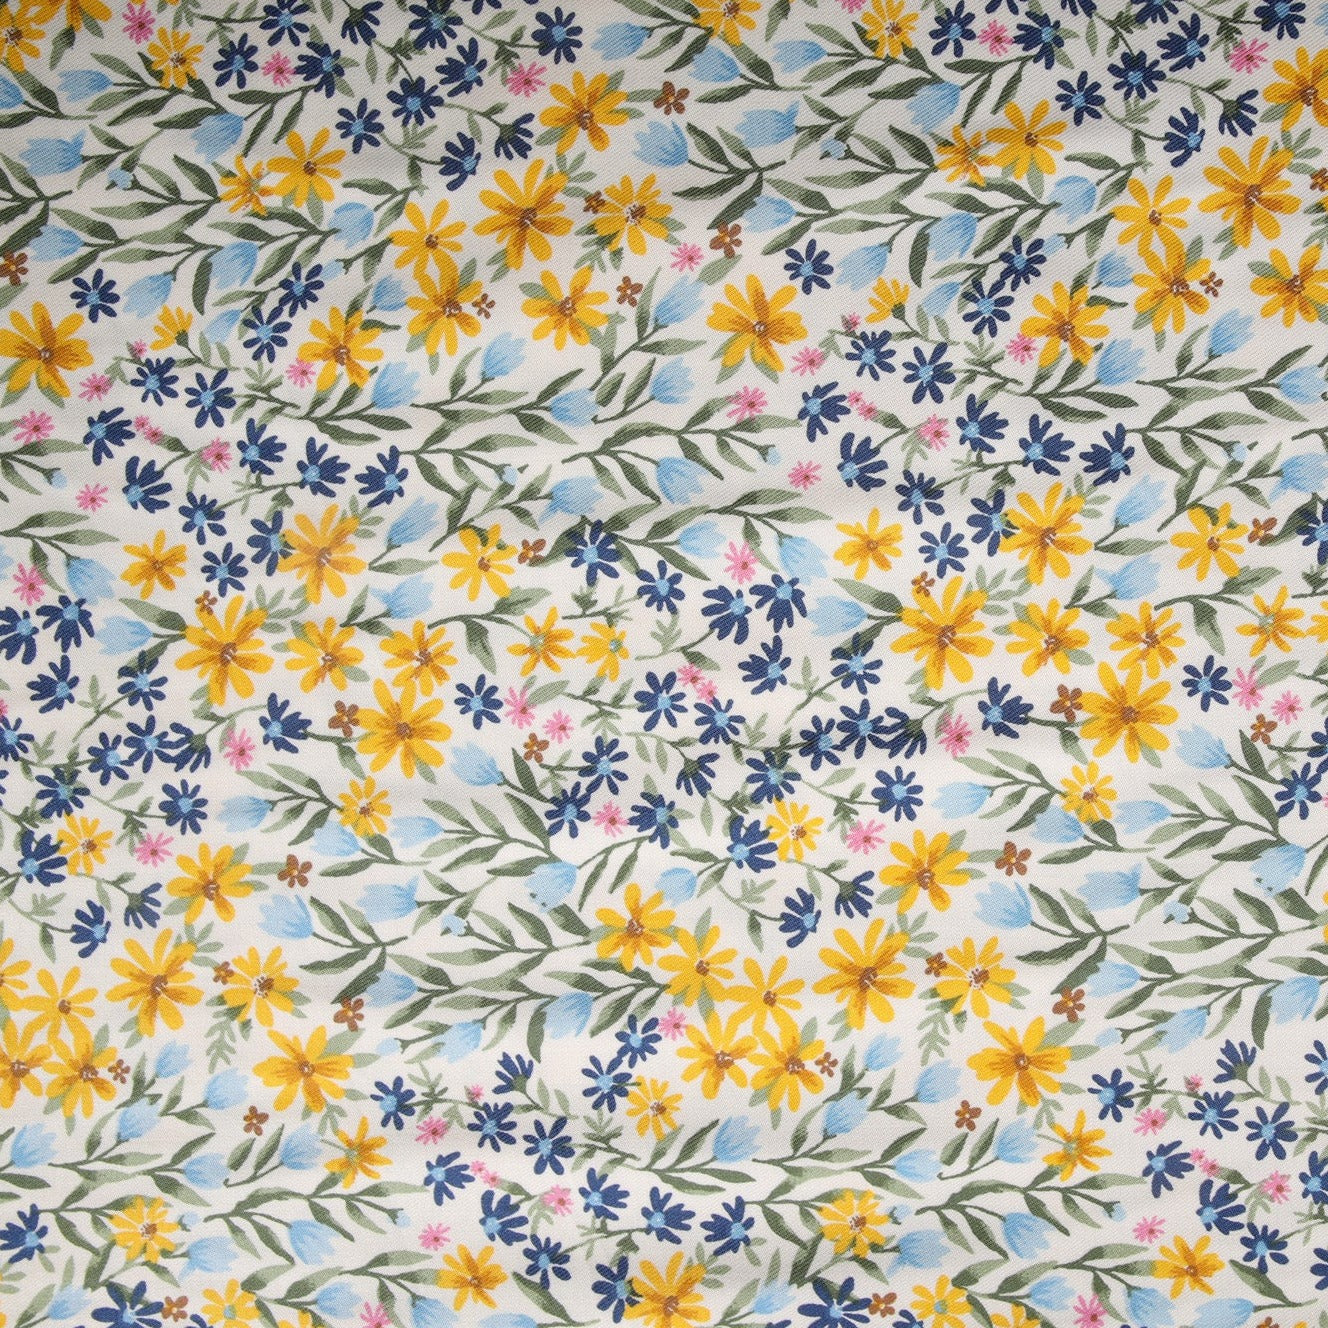 White & Yellow Ditsy Floral Print Rayon Fabric Online India